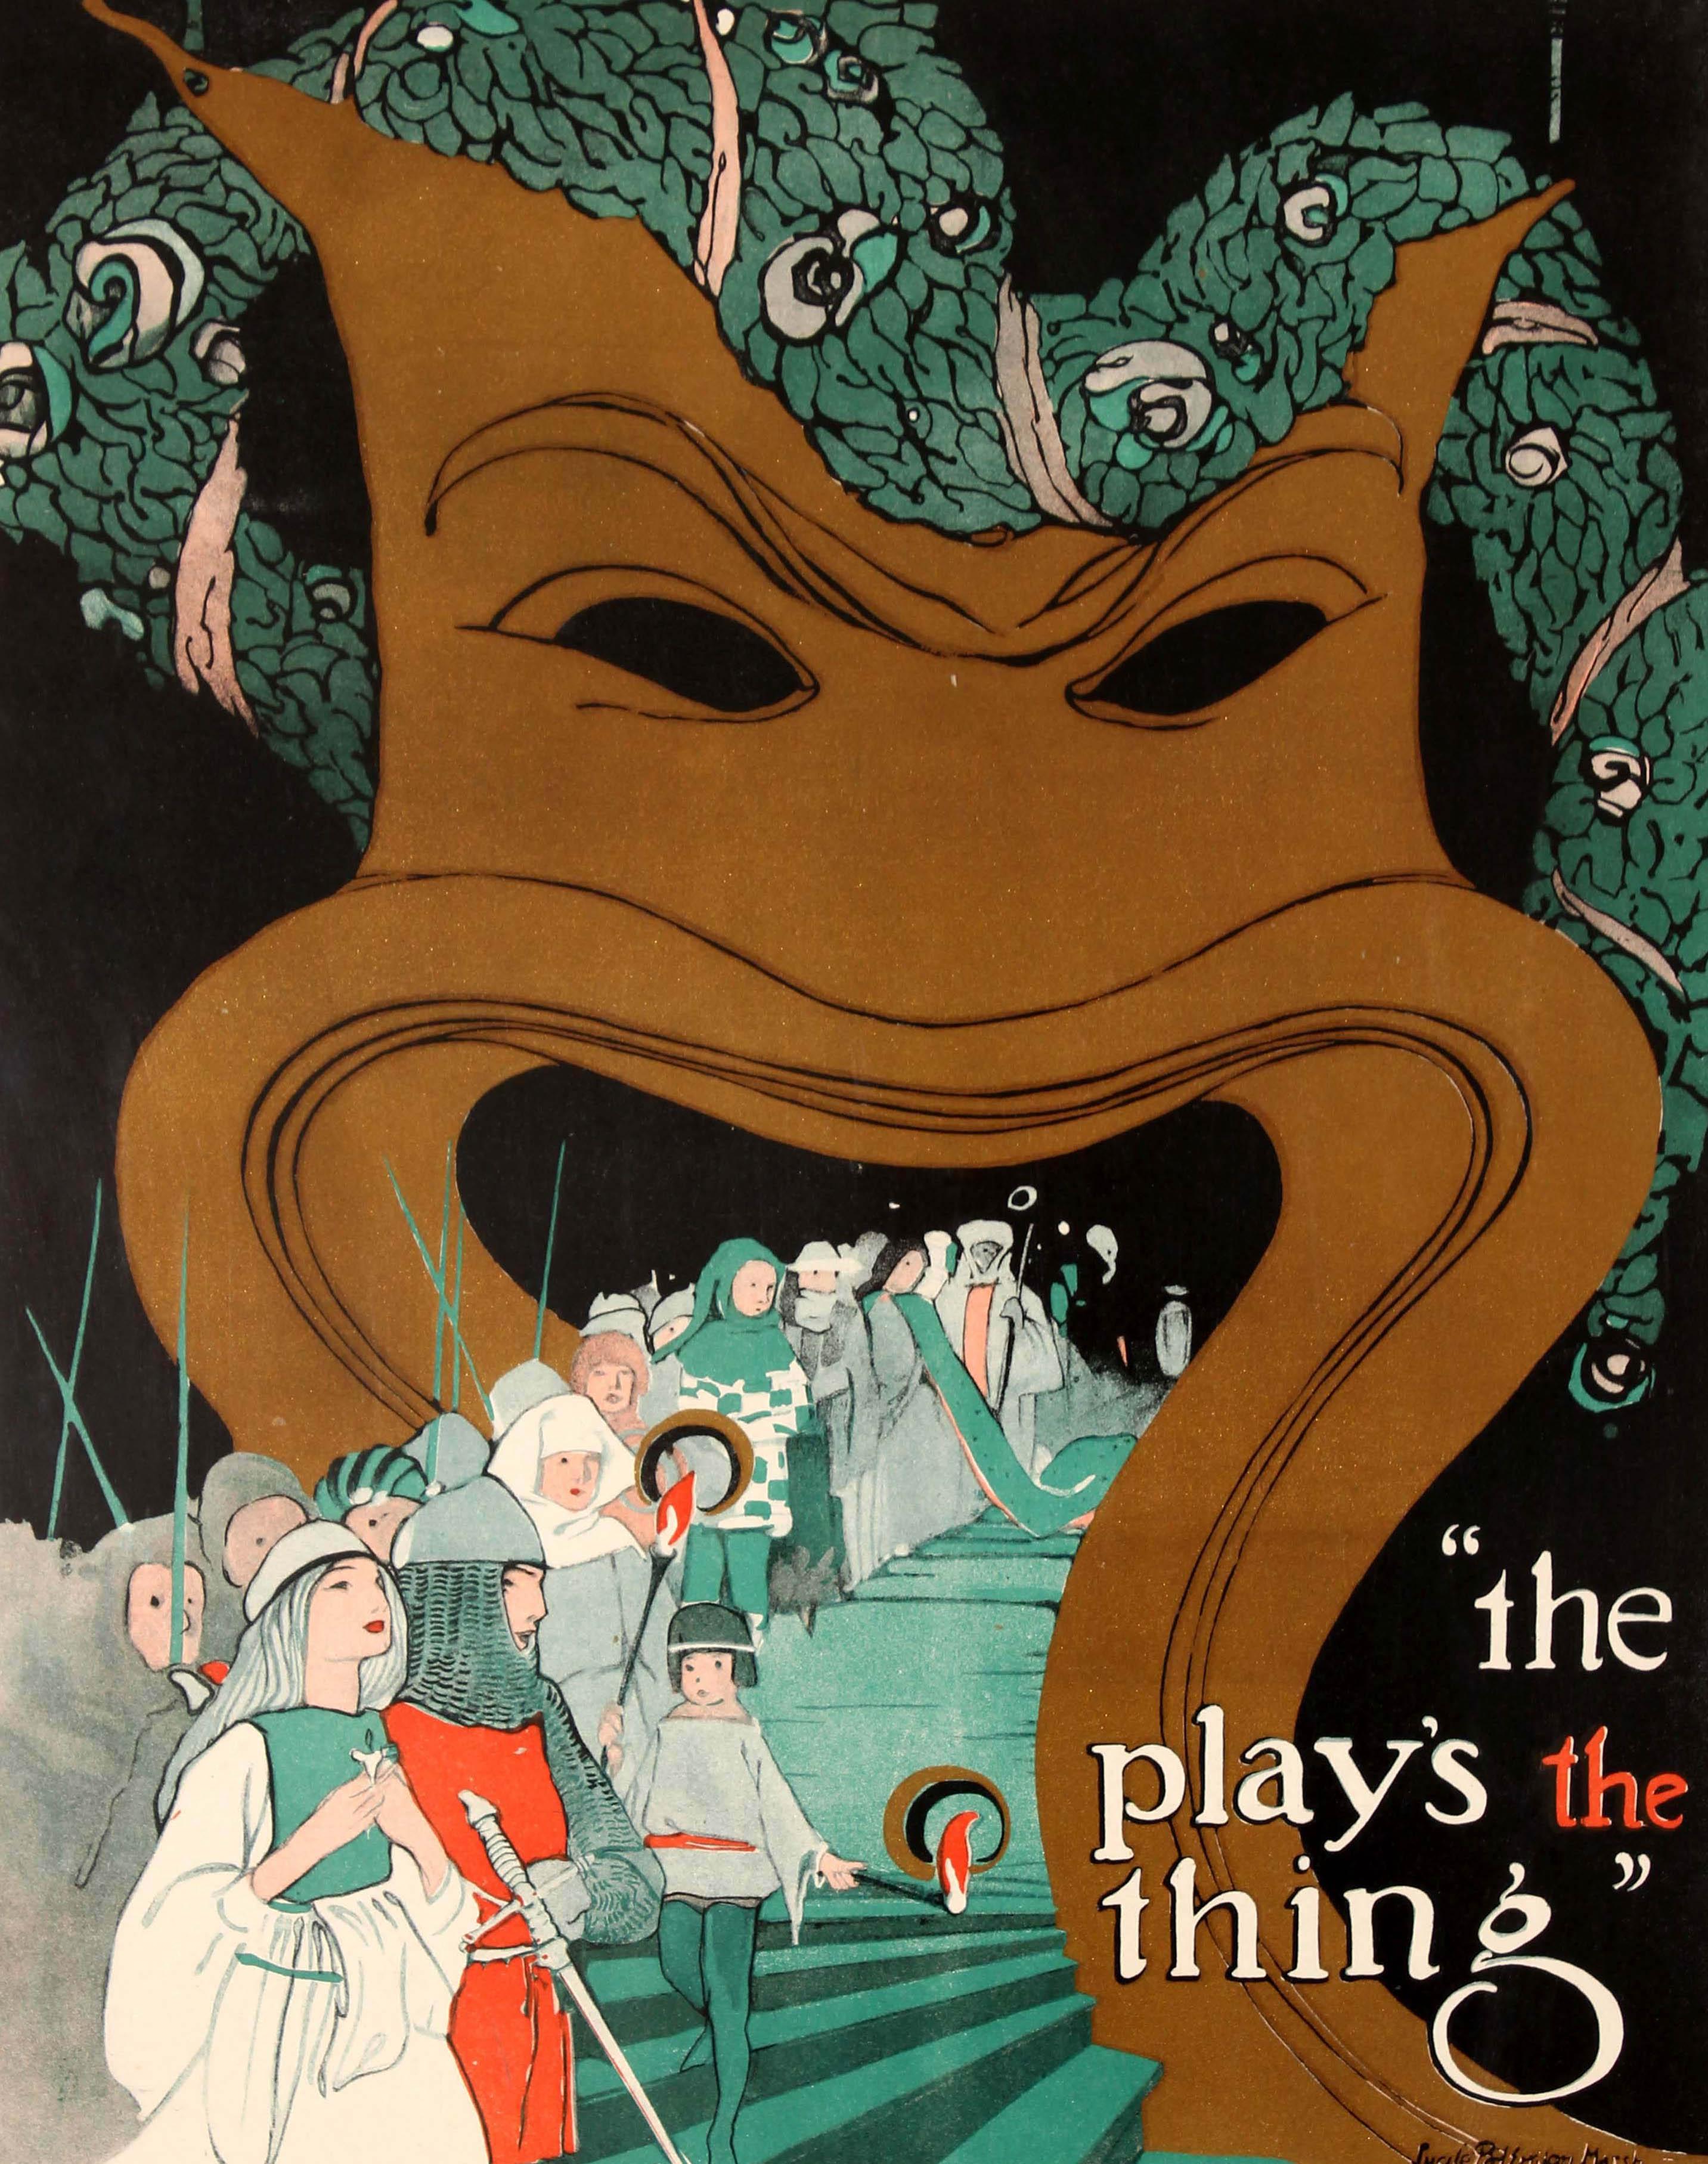 Original vintage advertising poster - The Play's the Thing - designed by the notable illustrator Lucile Patterson Marsh (1890-1978), published by the Bureau of Social Education and the National Board of the Young Women's Christian Association YWCA,